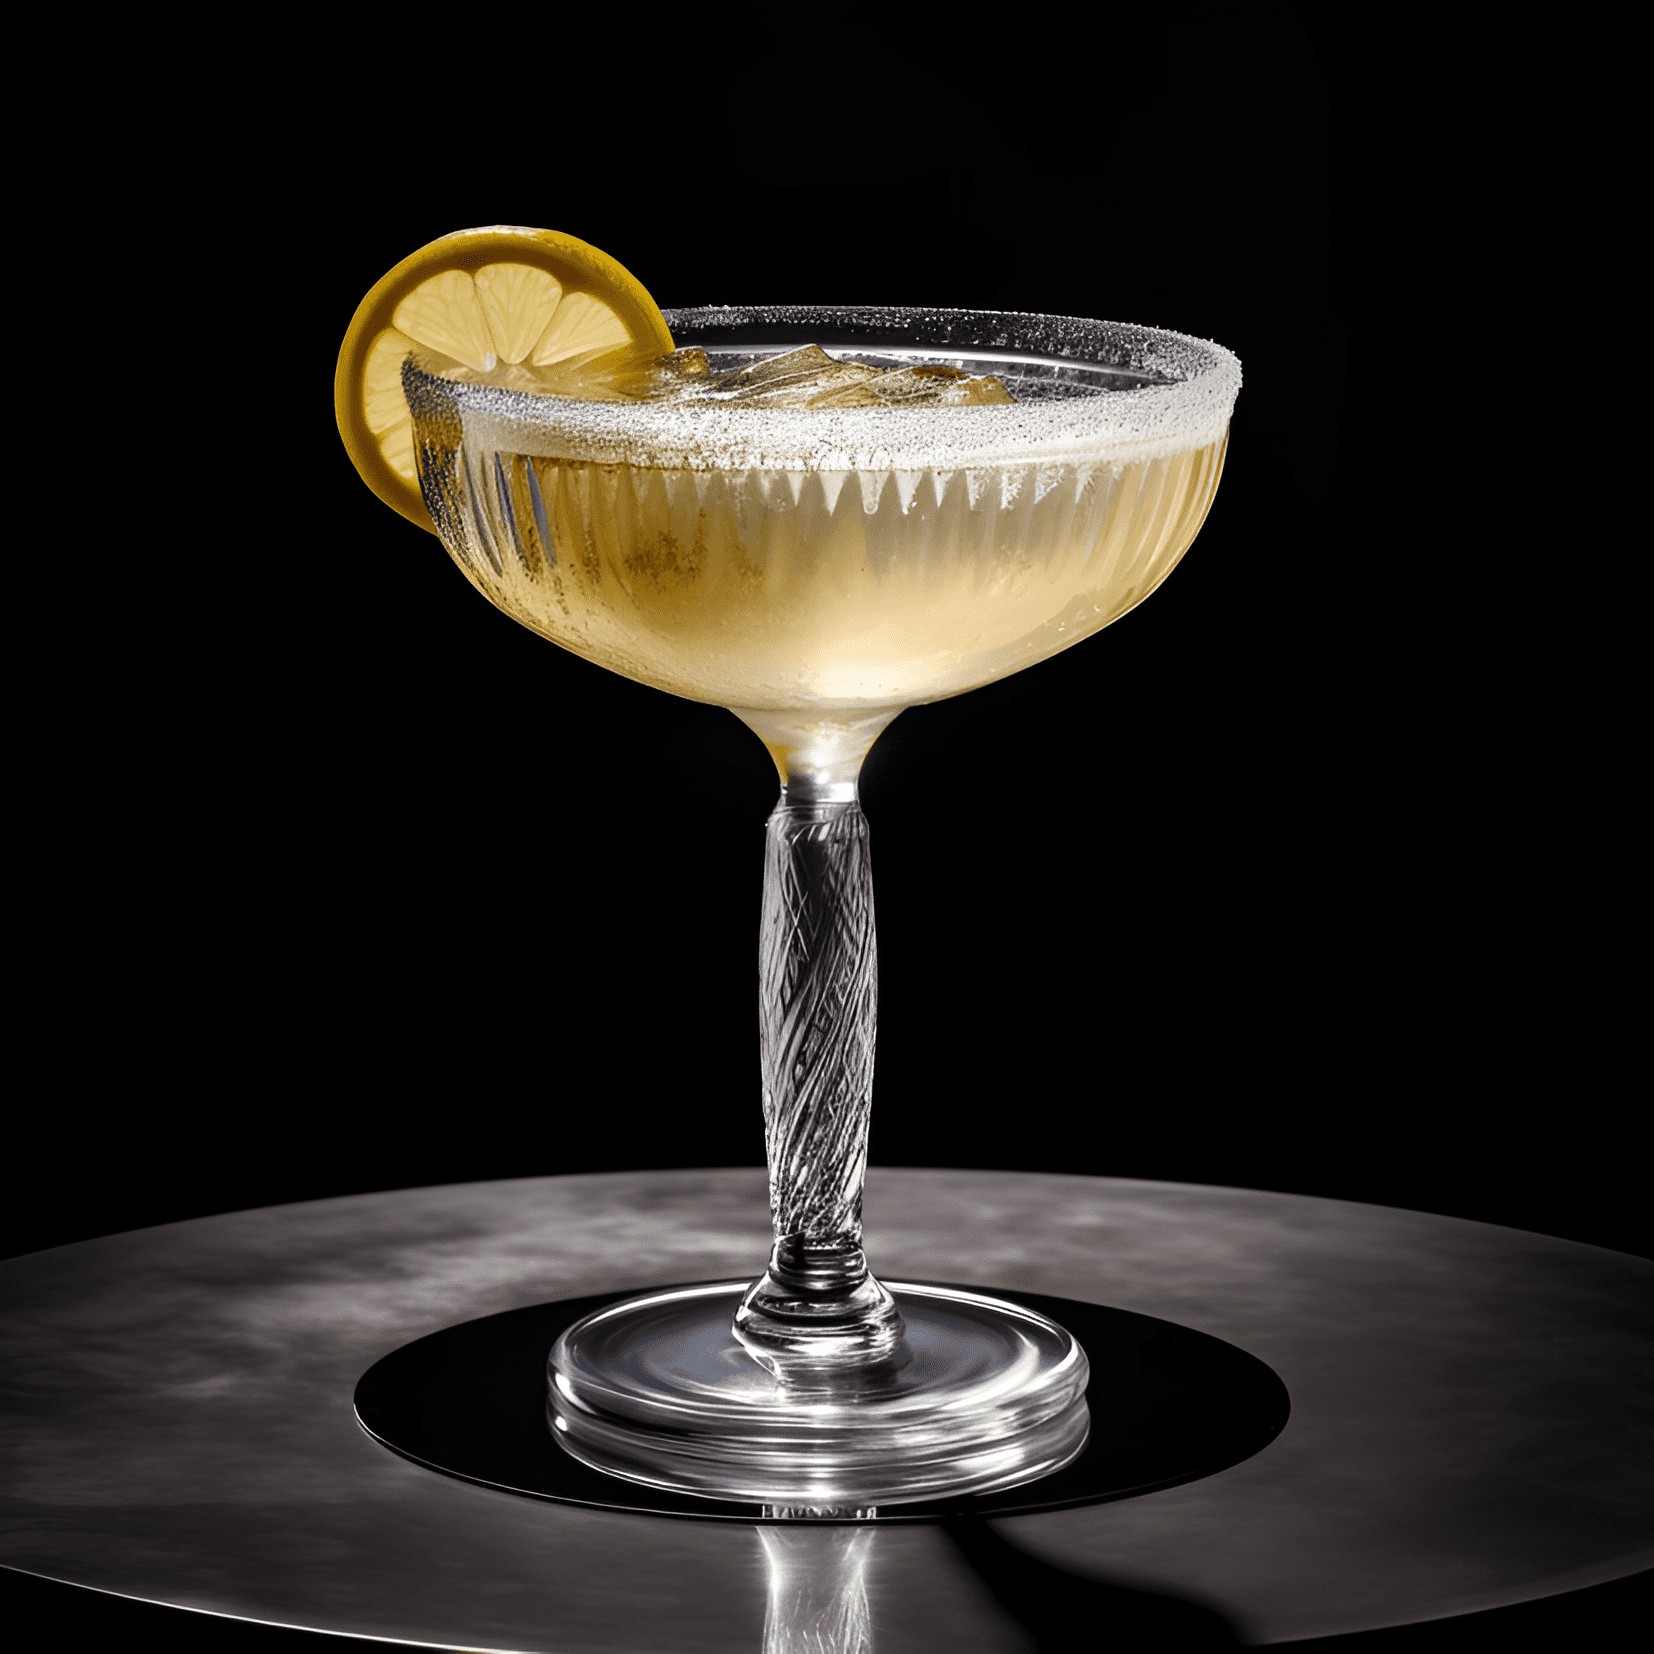 The Alaska Cocktail is a complex and herbal drink, with a slightly sweet and citrusy undertone. It has a strong, bold flavor profile, with a smooth and silky finish.